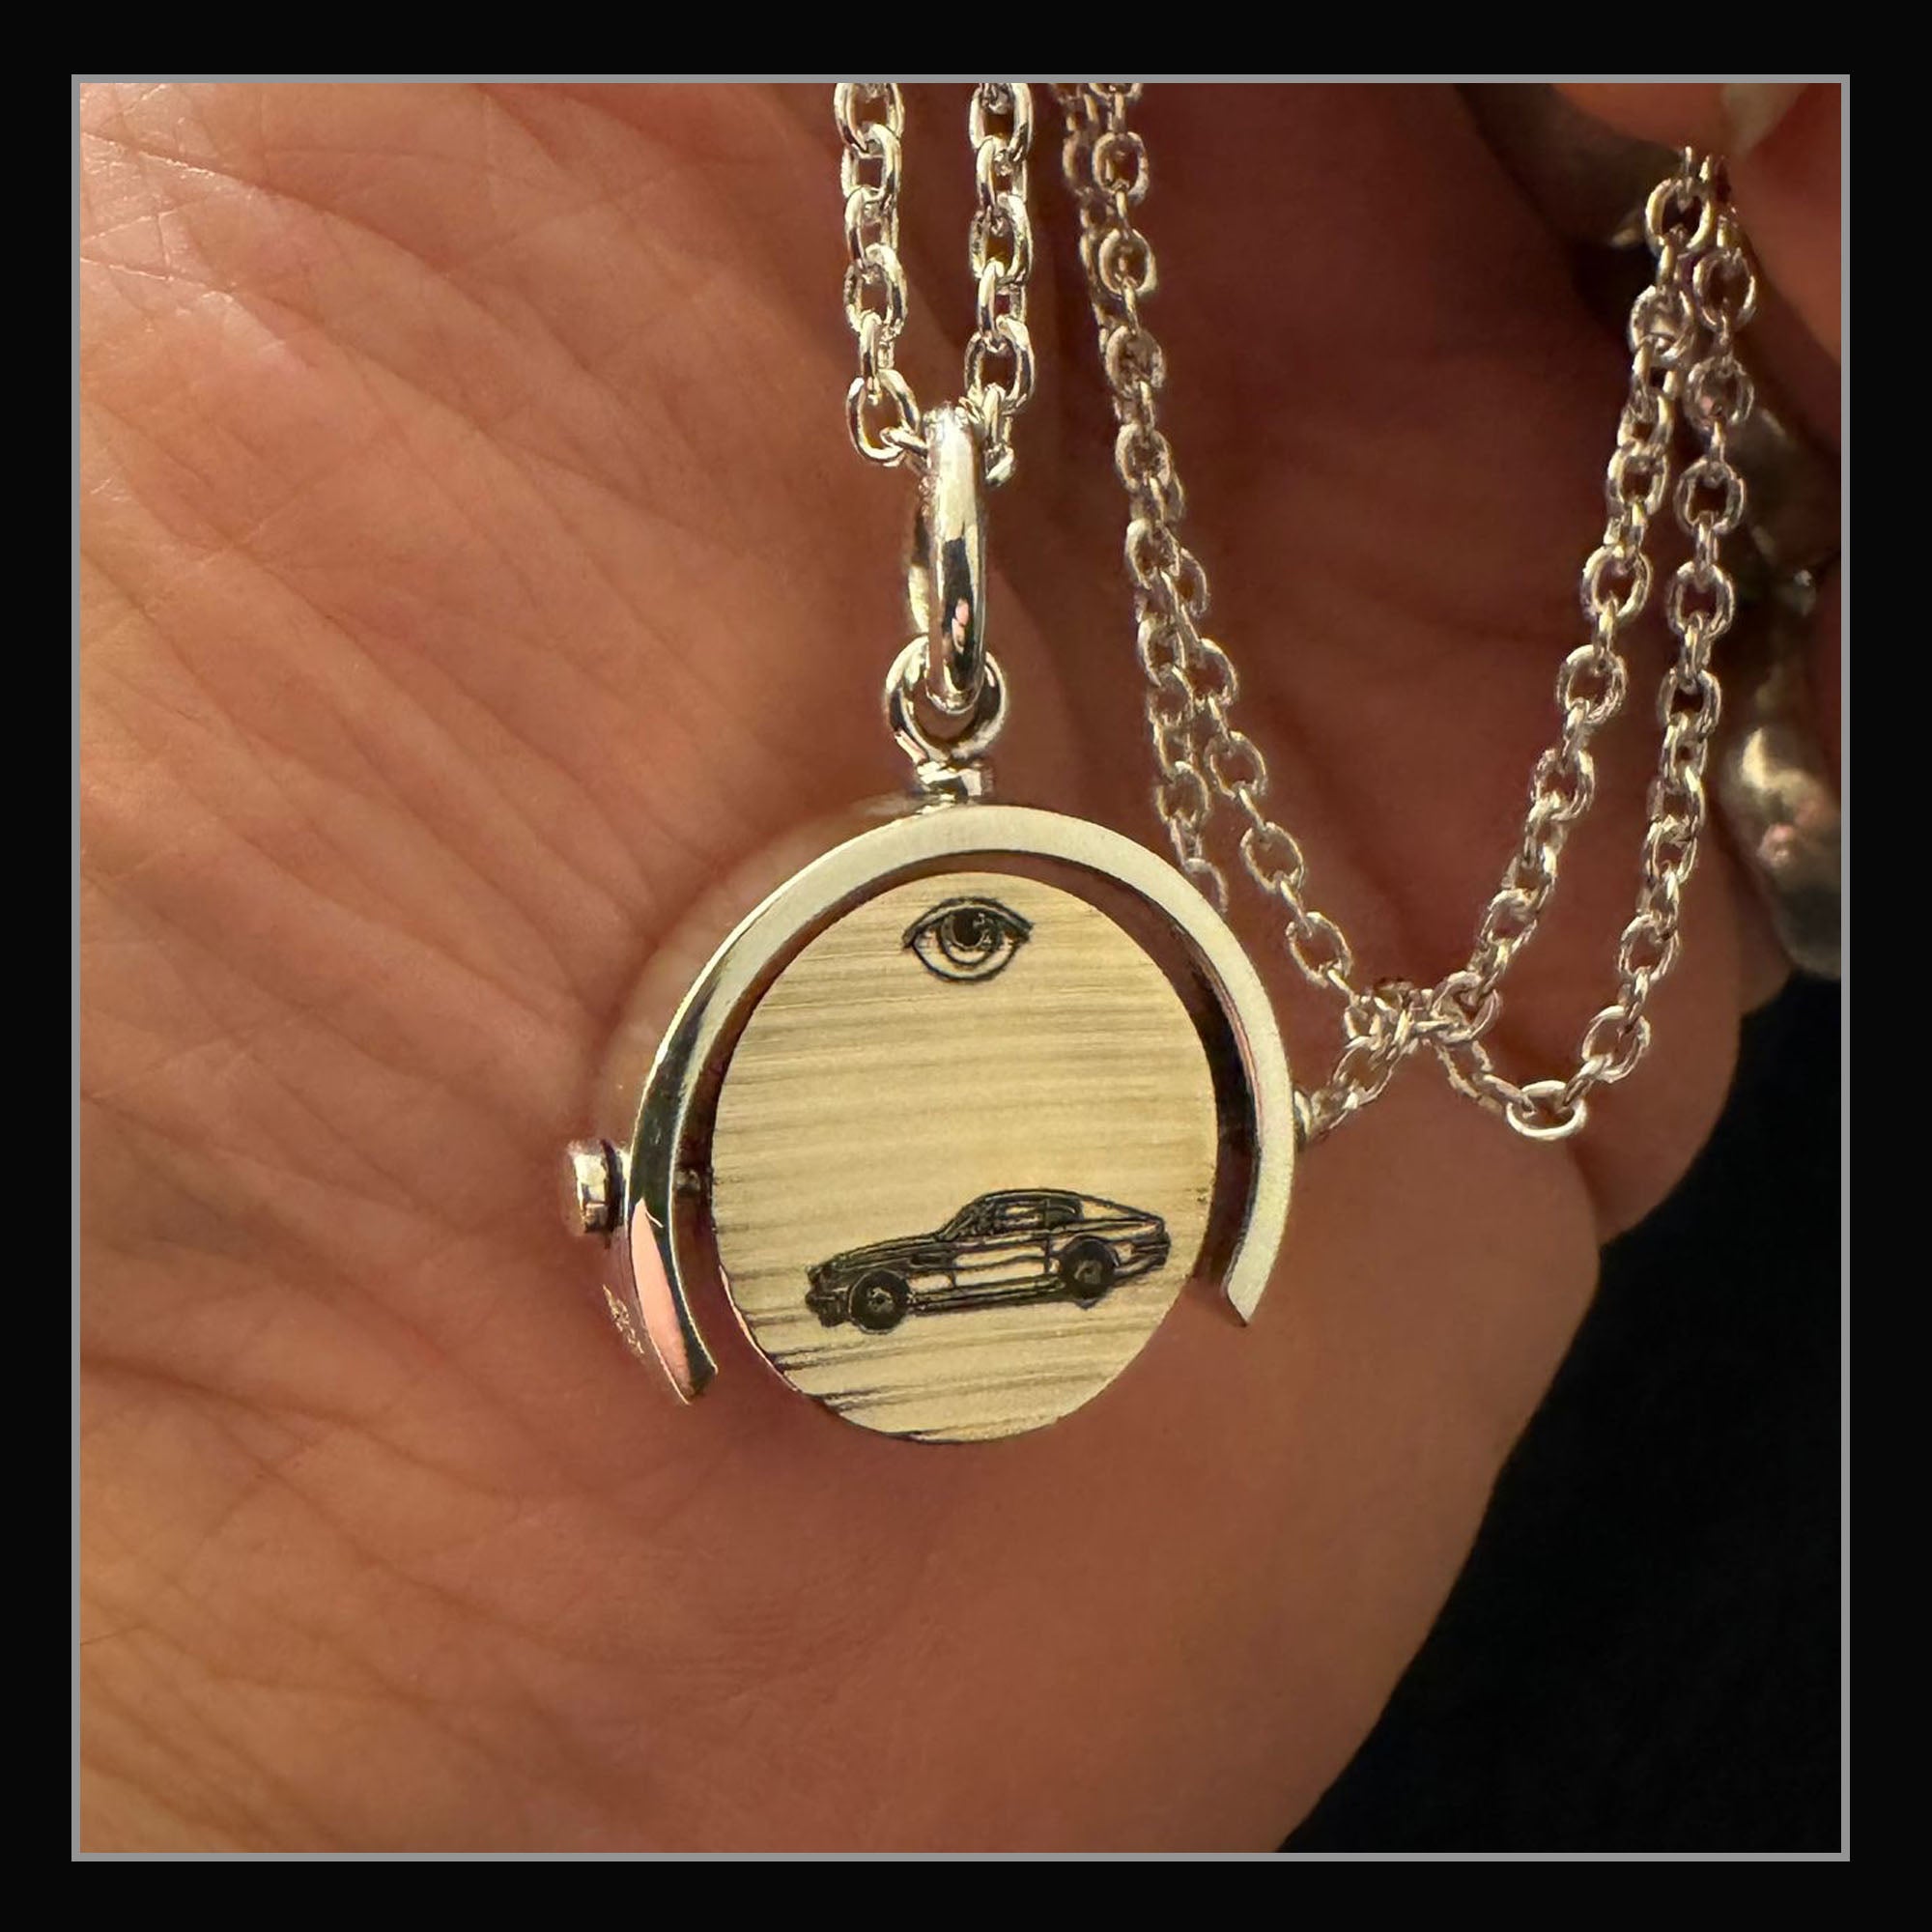 Roger Taylor - Taylored 'Car' Spinner Pendant Second Batch